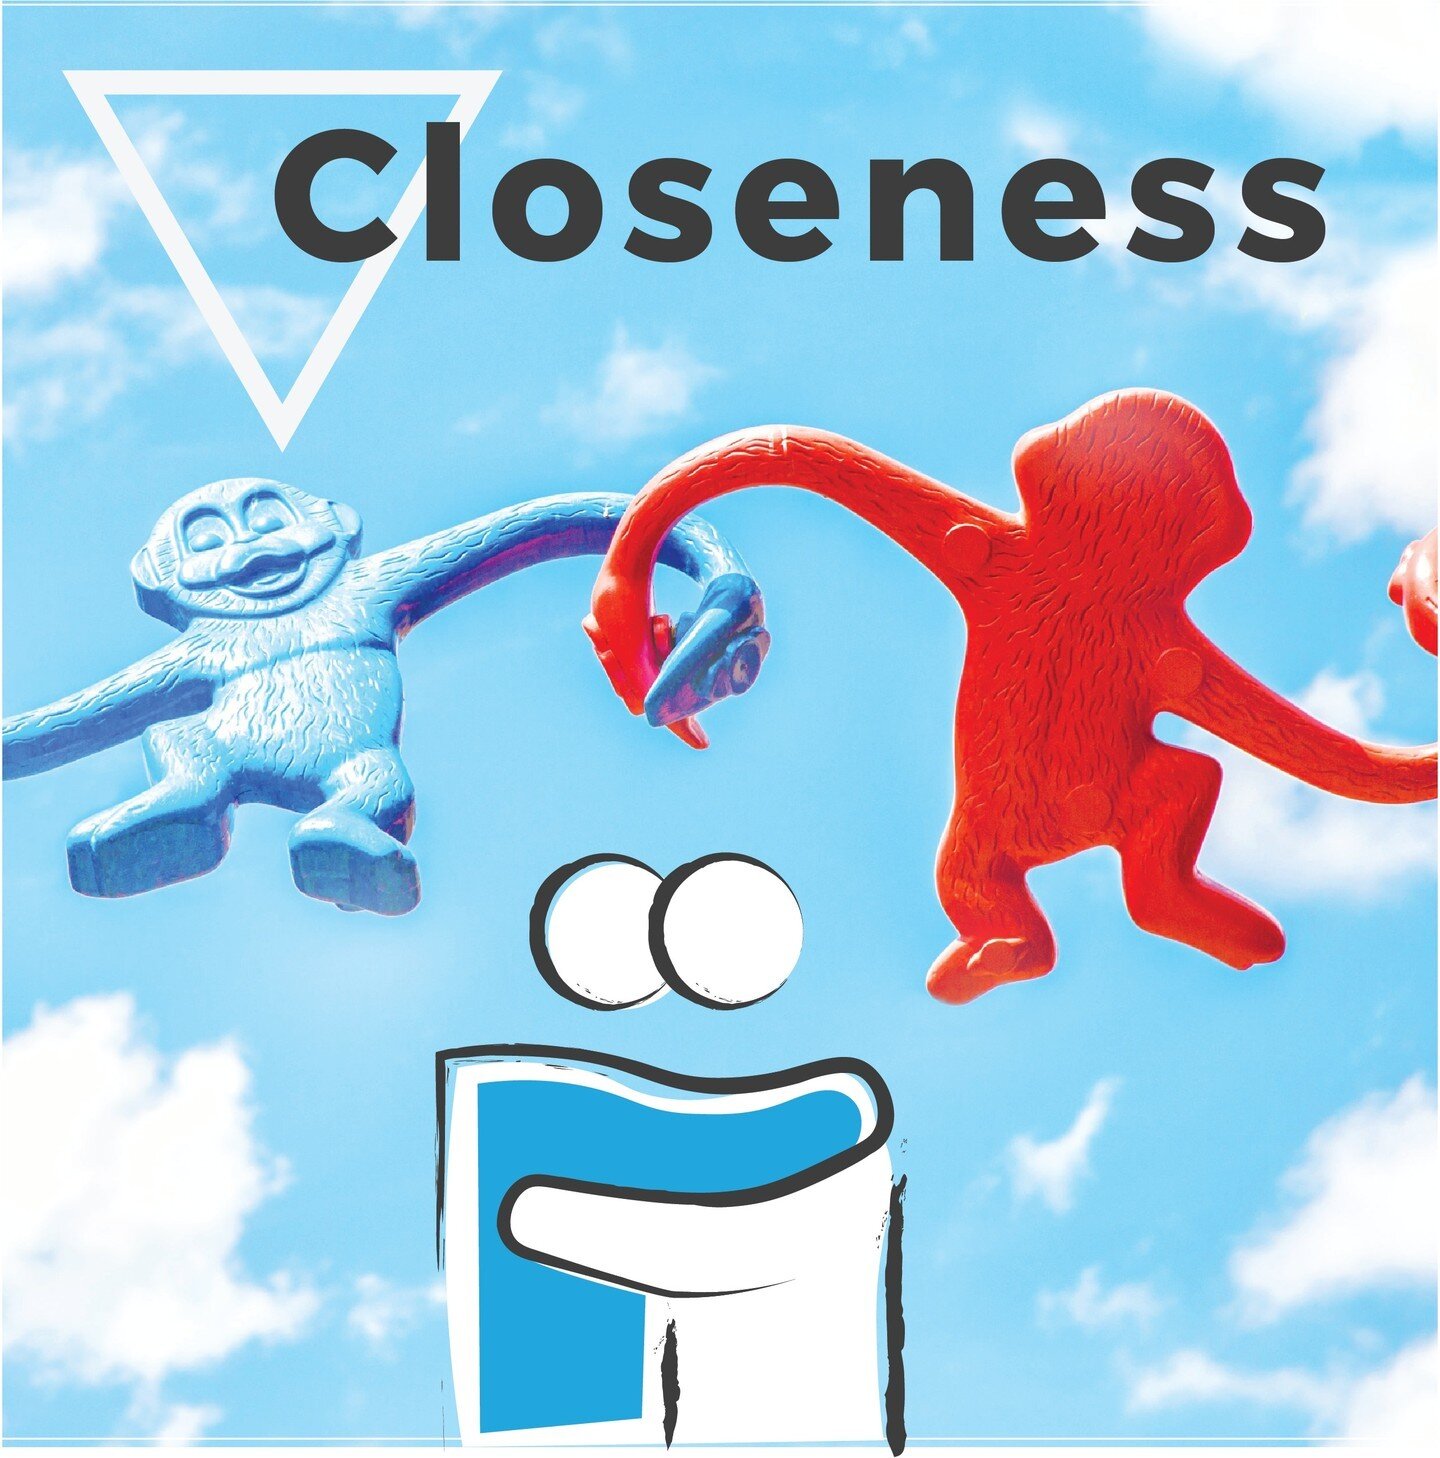 Interested in finding out more about one of the research industry's biggest buzz words?

Look no further, here's 250 words all about Closeness, our fourth building block of customer loyalty: https://www.thisismotif.com/what-is-closeness

#loyalty #cl